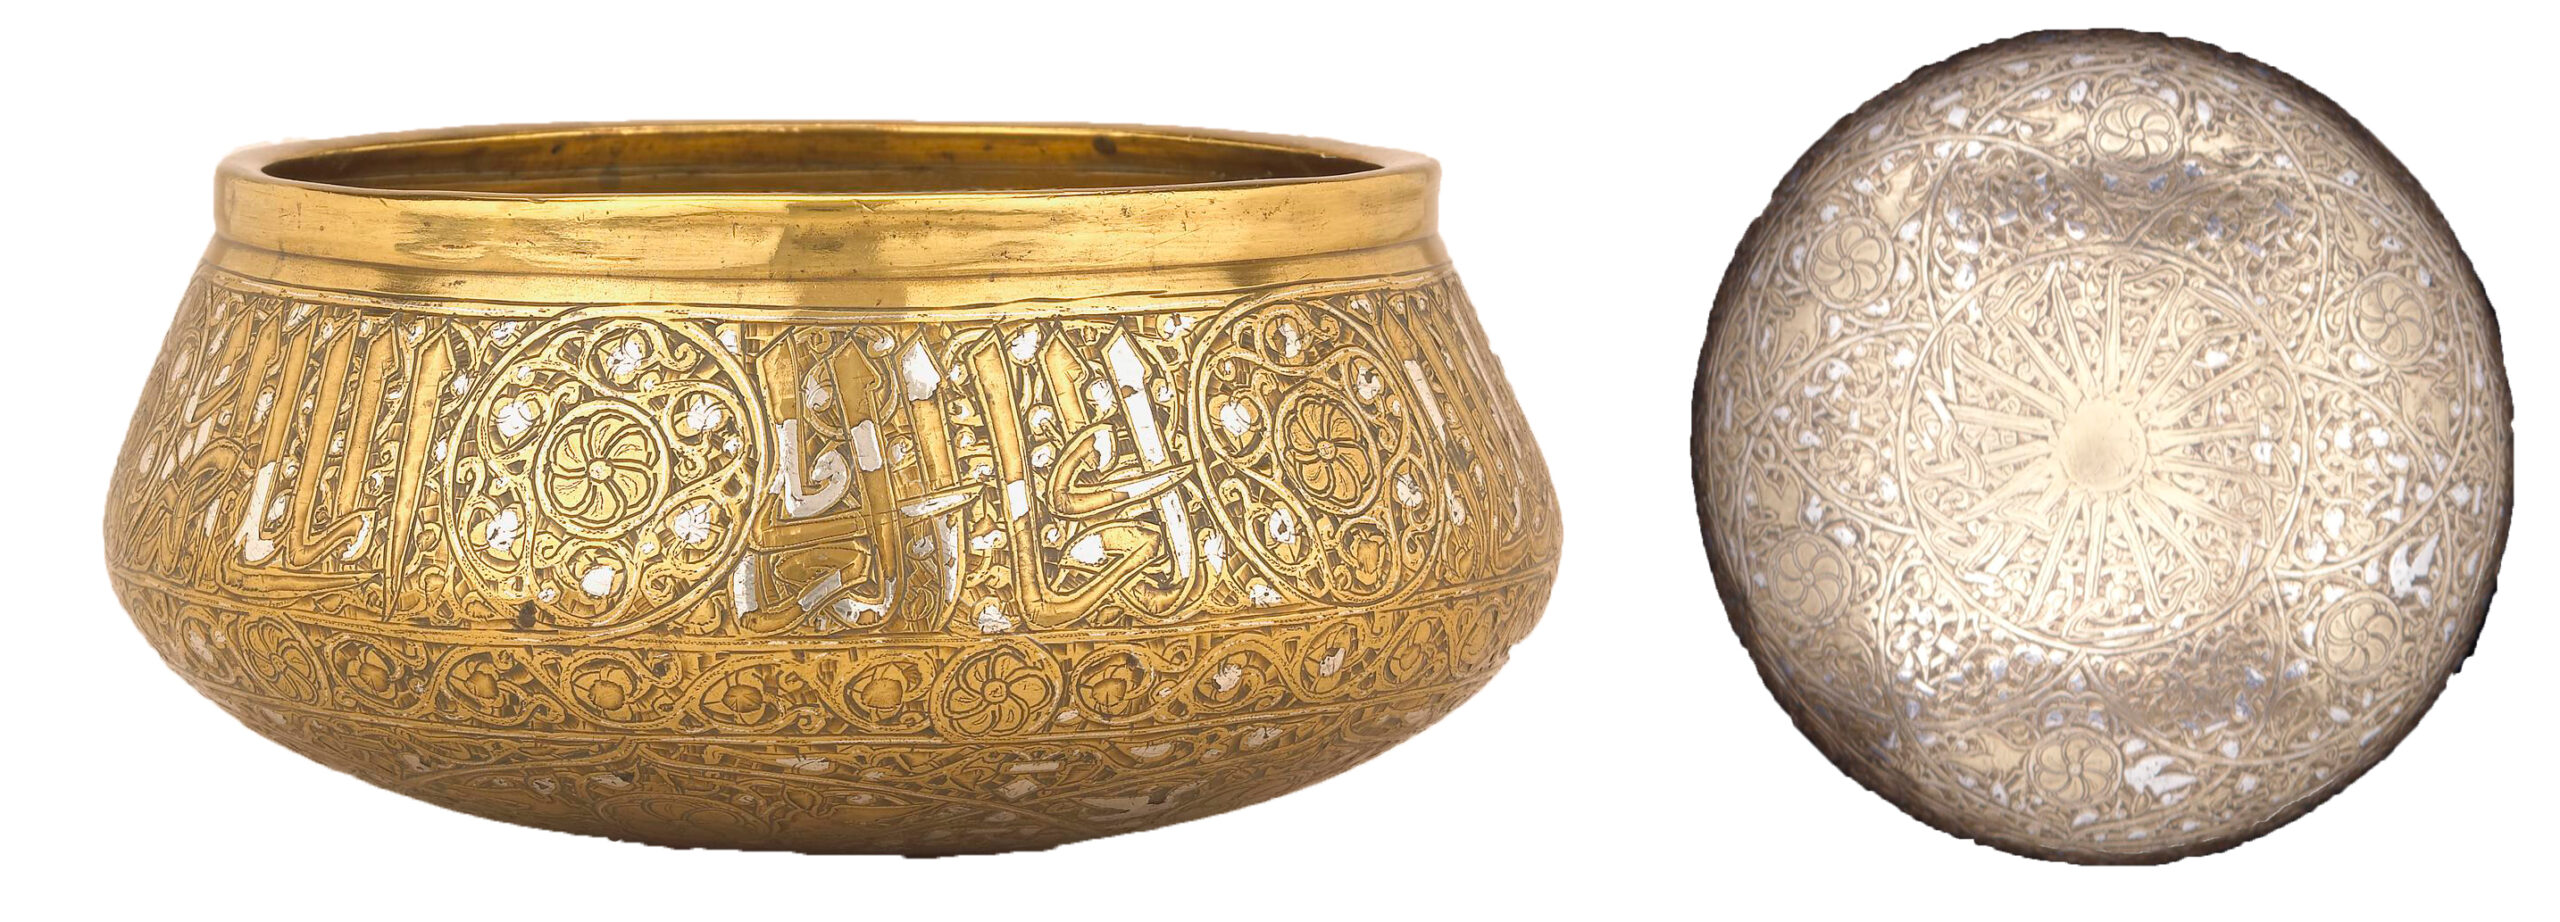 Mamluk bowl for anonymous amir, Egypt or Syria, 14th century, brass with silver inlay, 15.10 x 7 cm (British Museum)